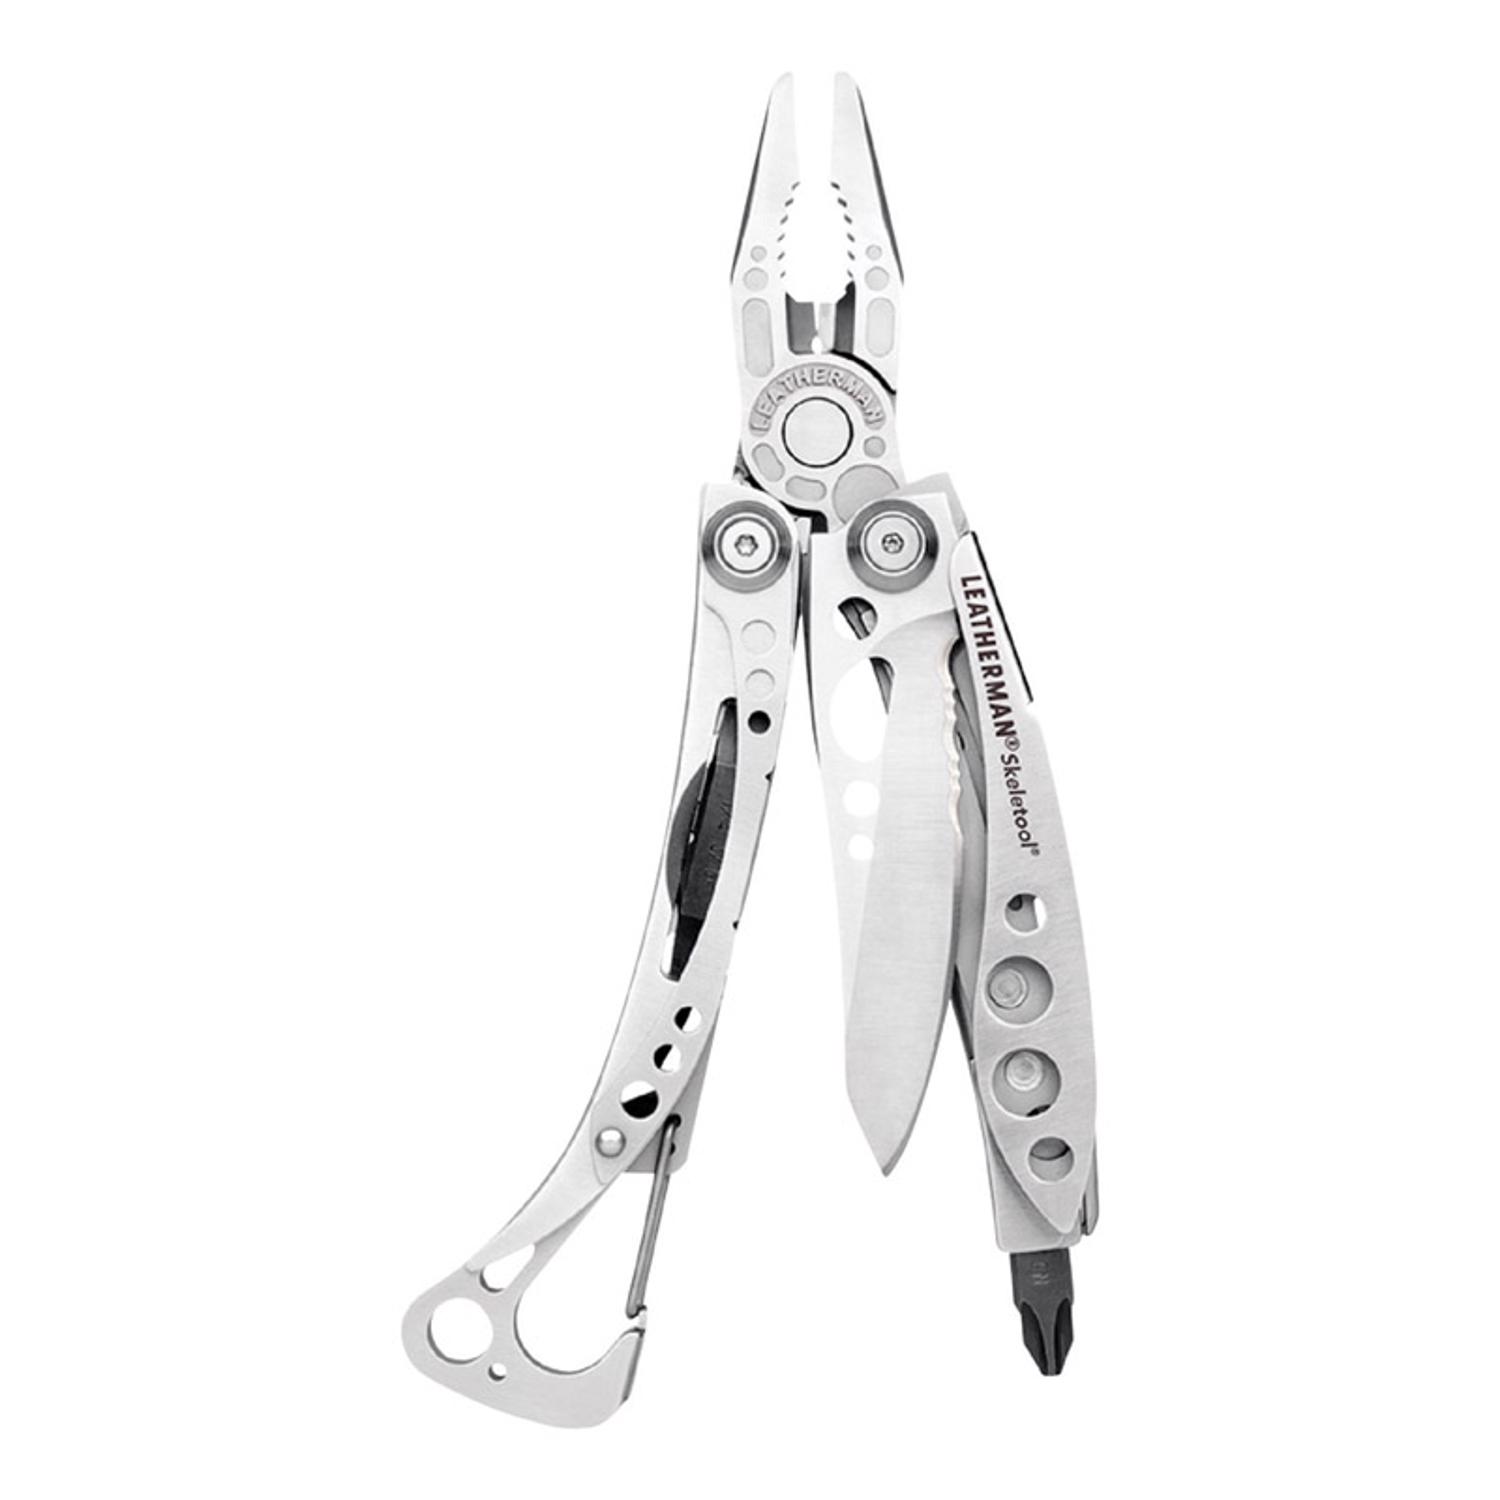 Photos - Other sporting goods Leatherman Skeletool Silver Multi Tool 830846 